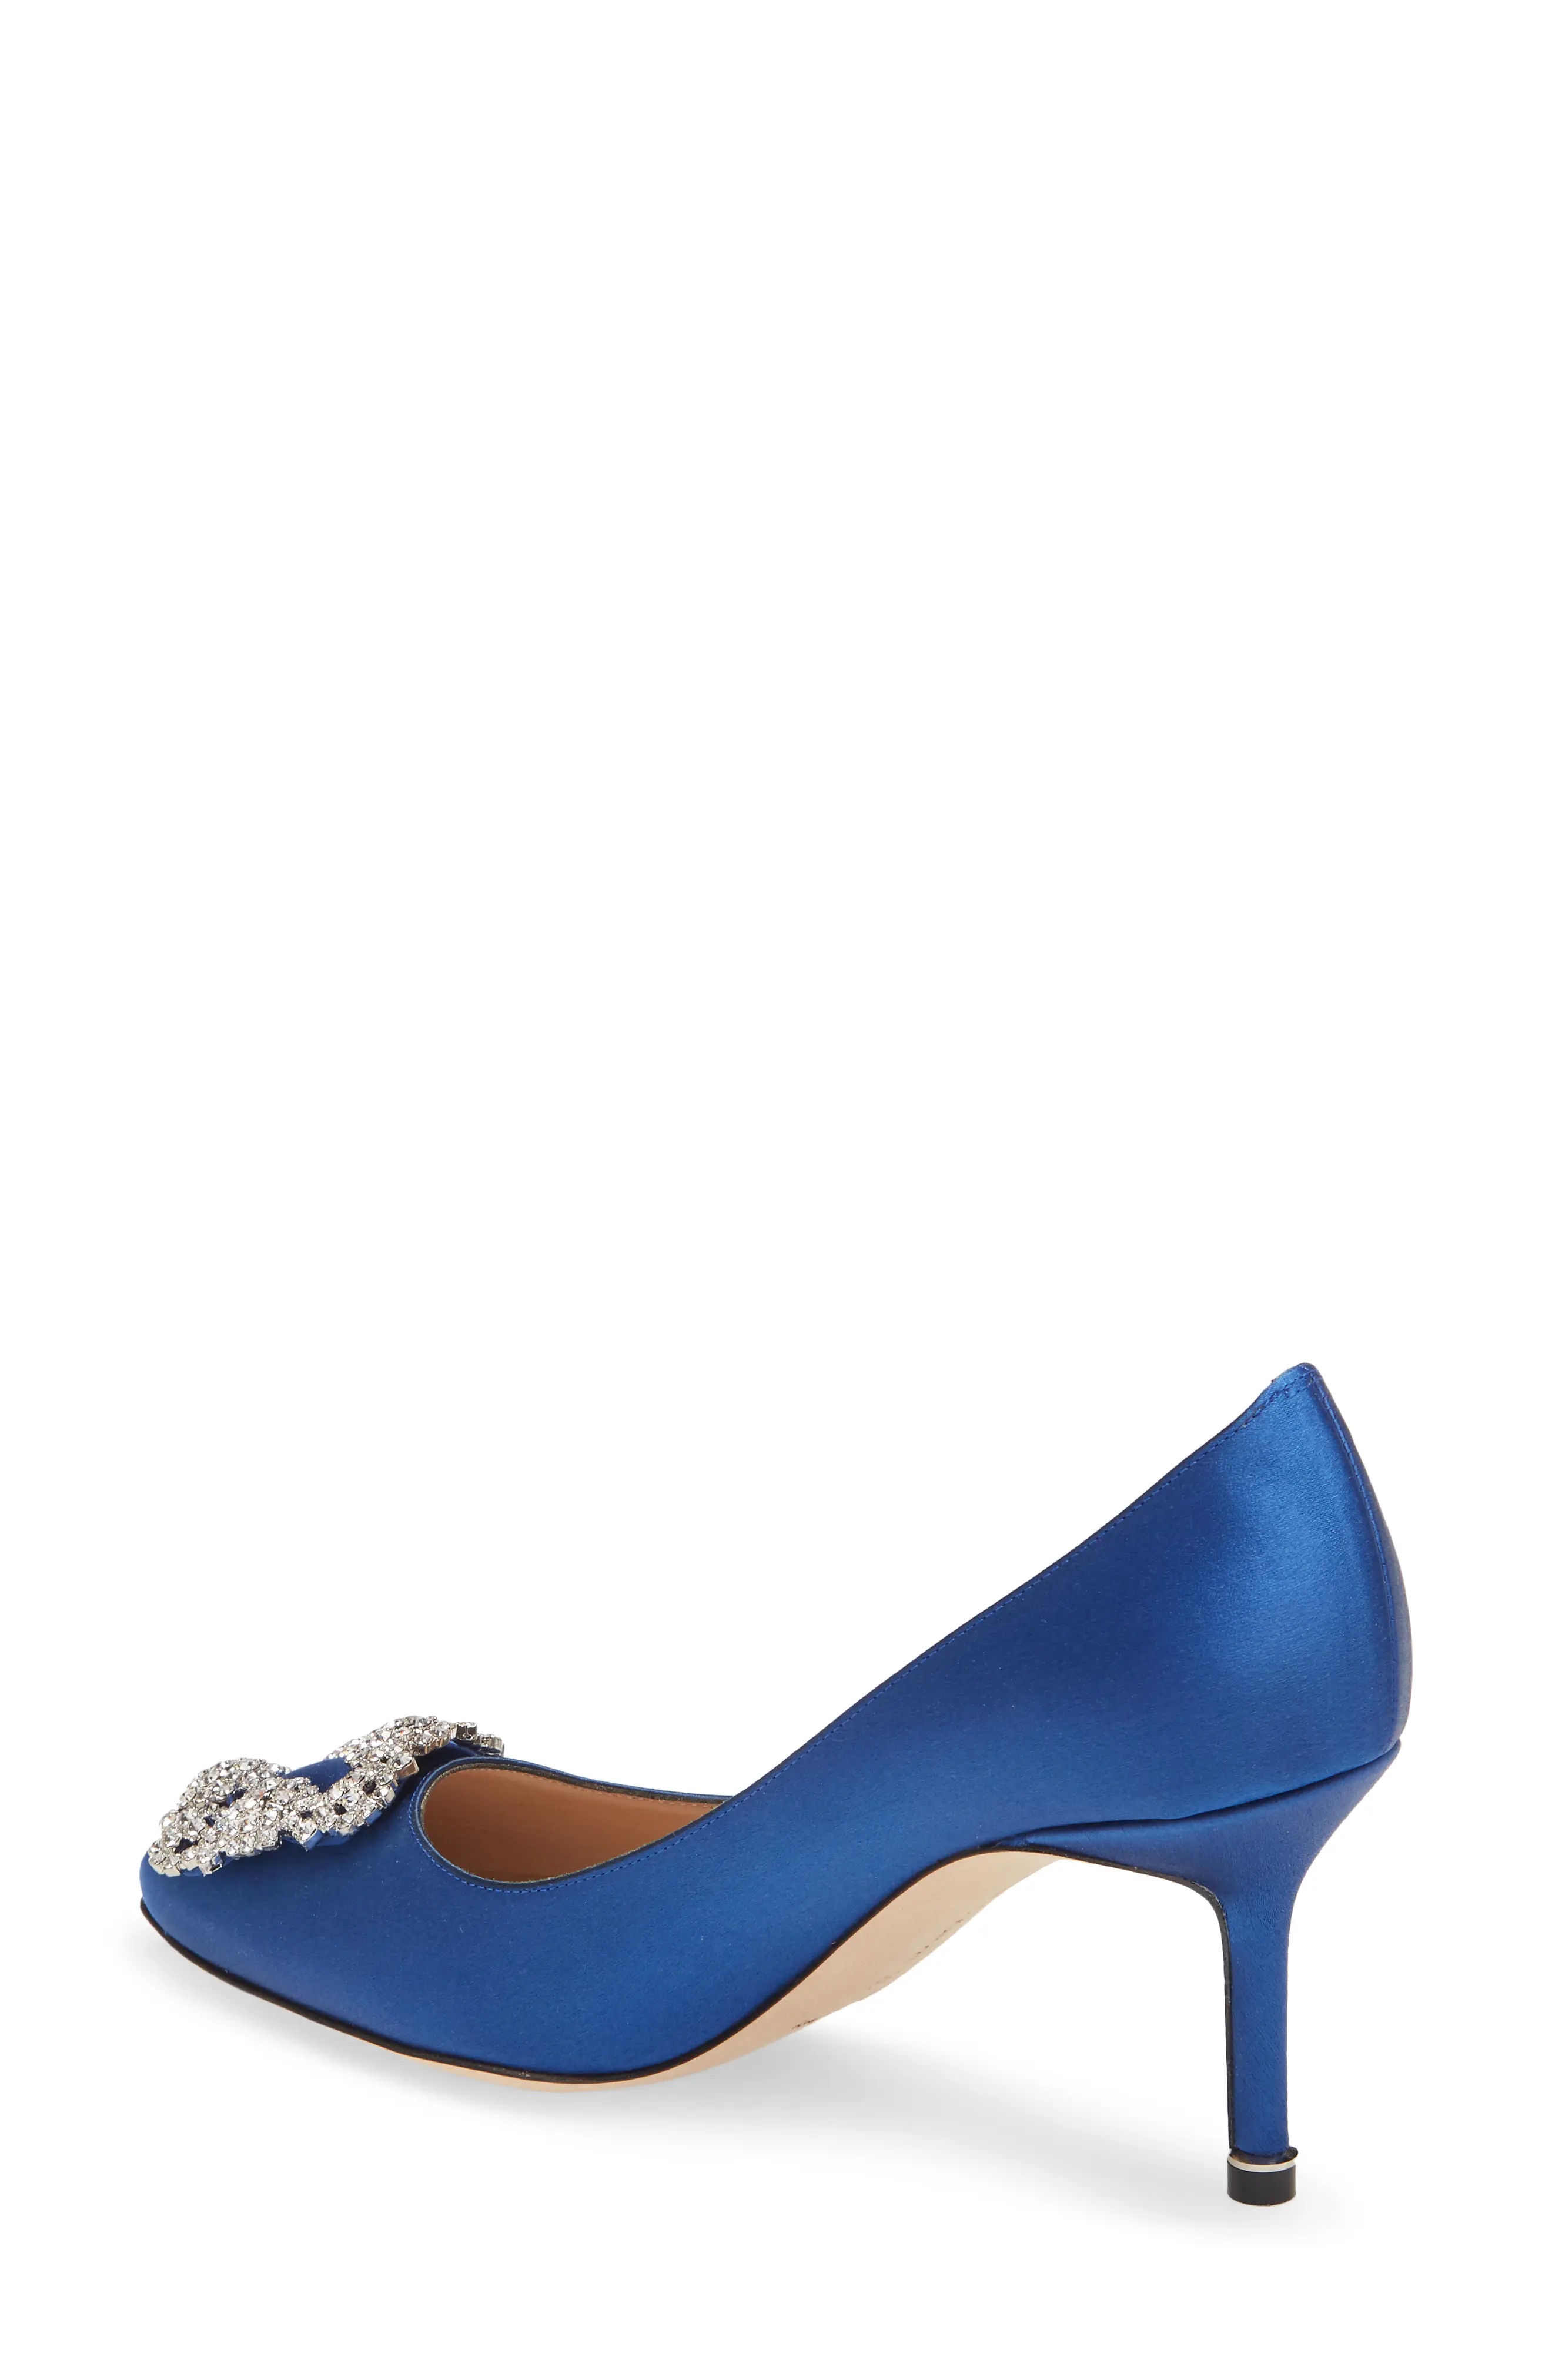 Hangisi Crystal Buckle Pump in Blue Satin Clear/Buckle - 2